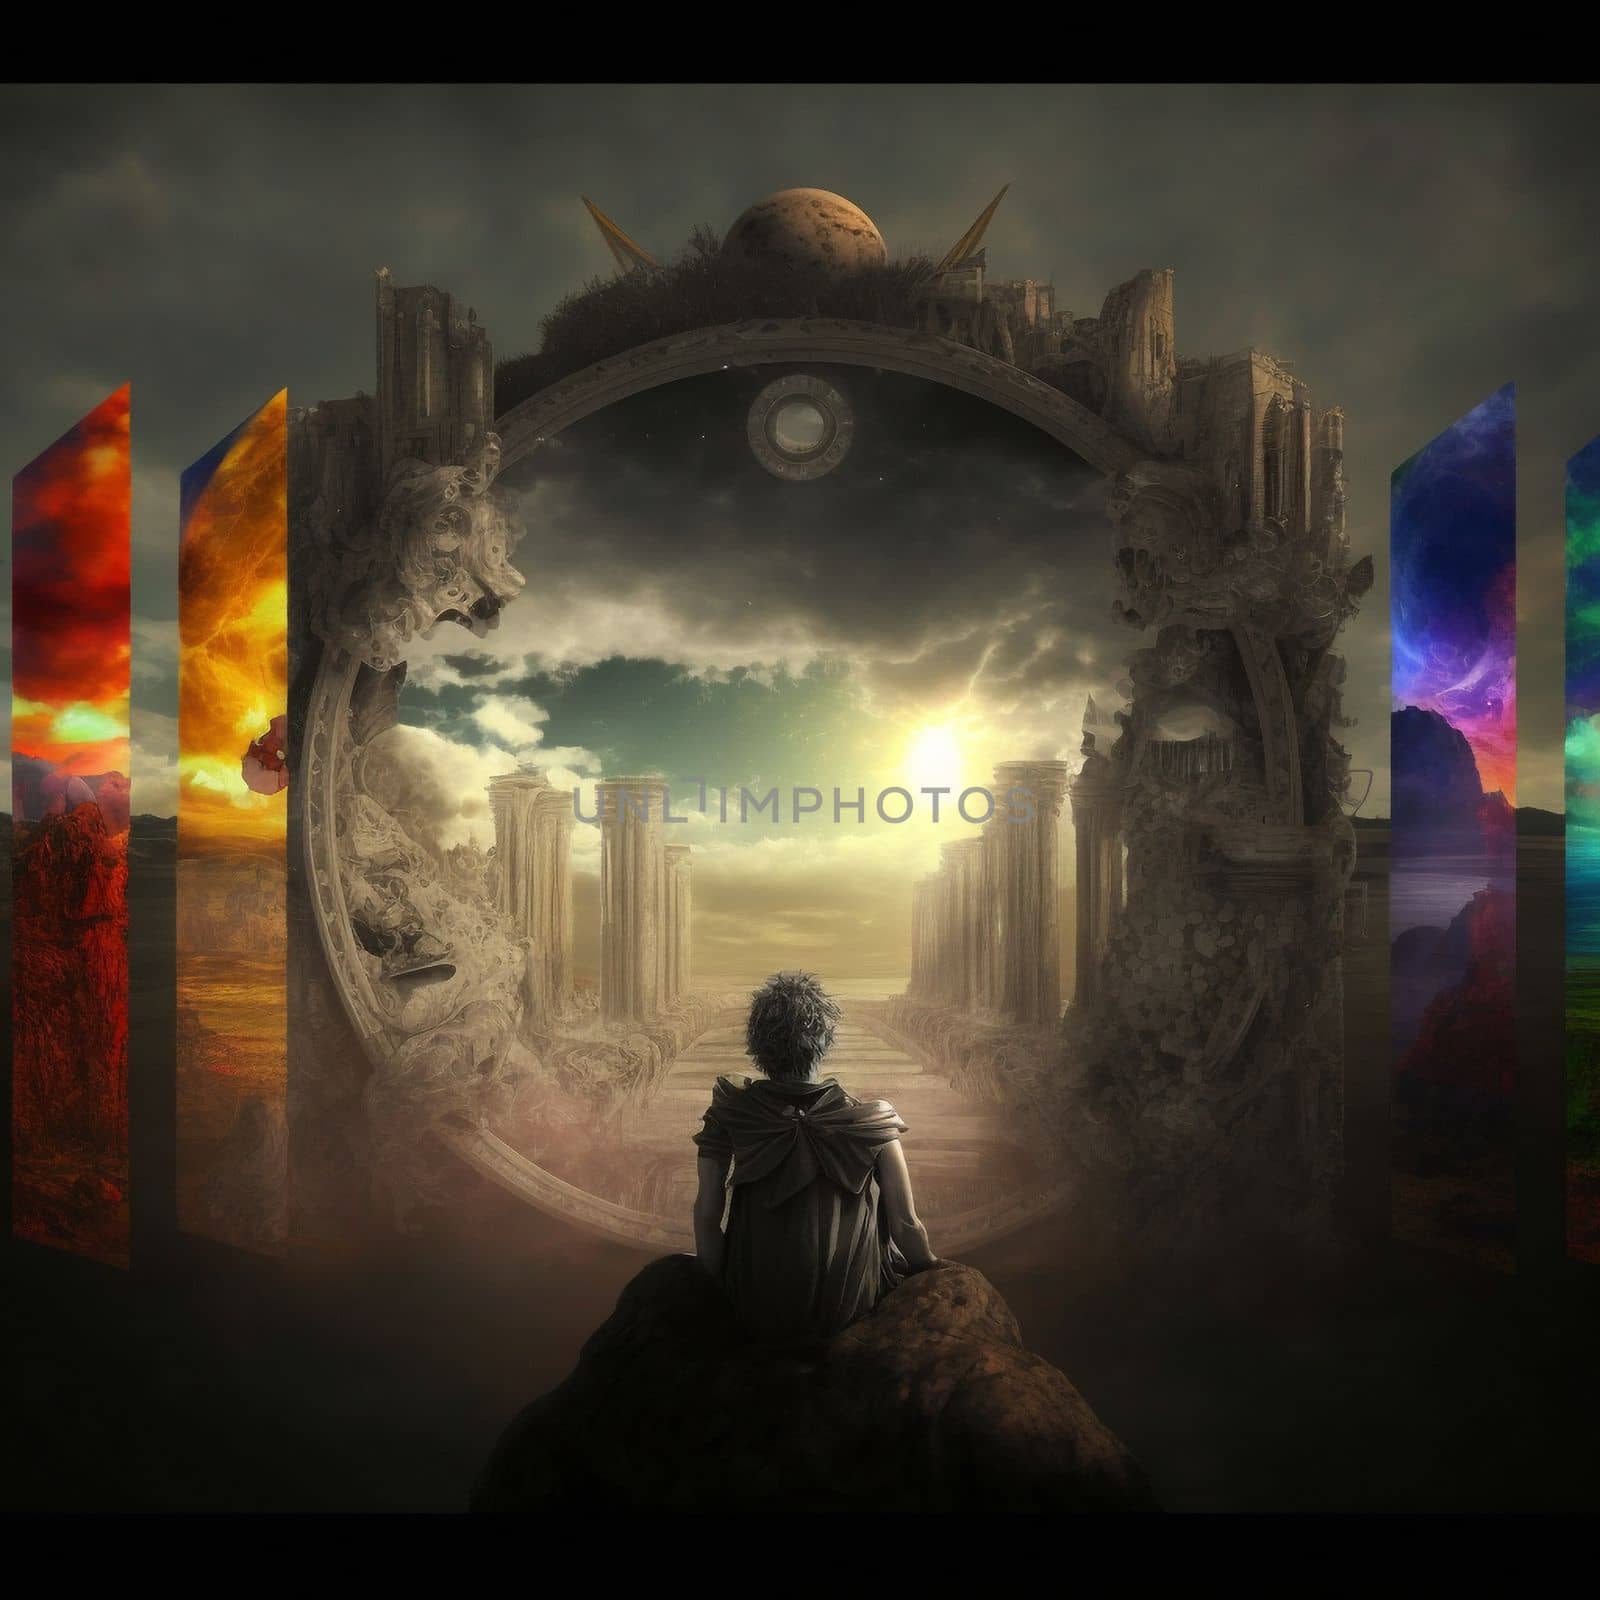 an ancient warrior between worlds stands in front of portals to other worlds by NeuroSky